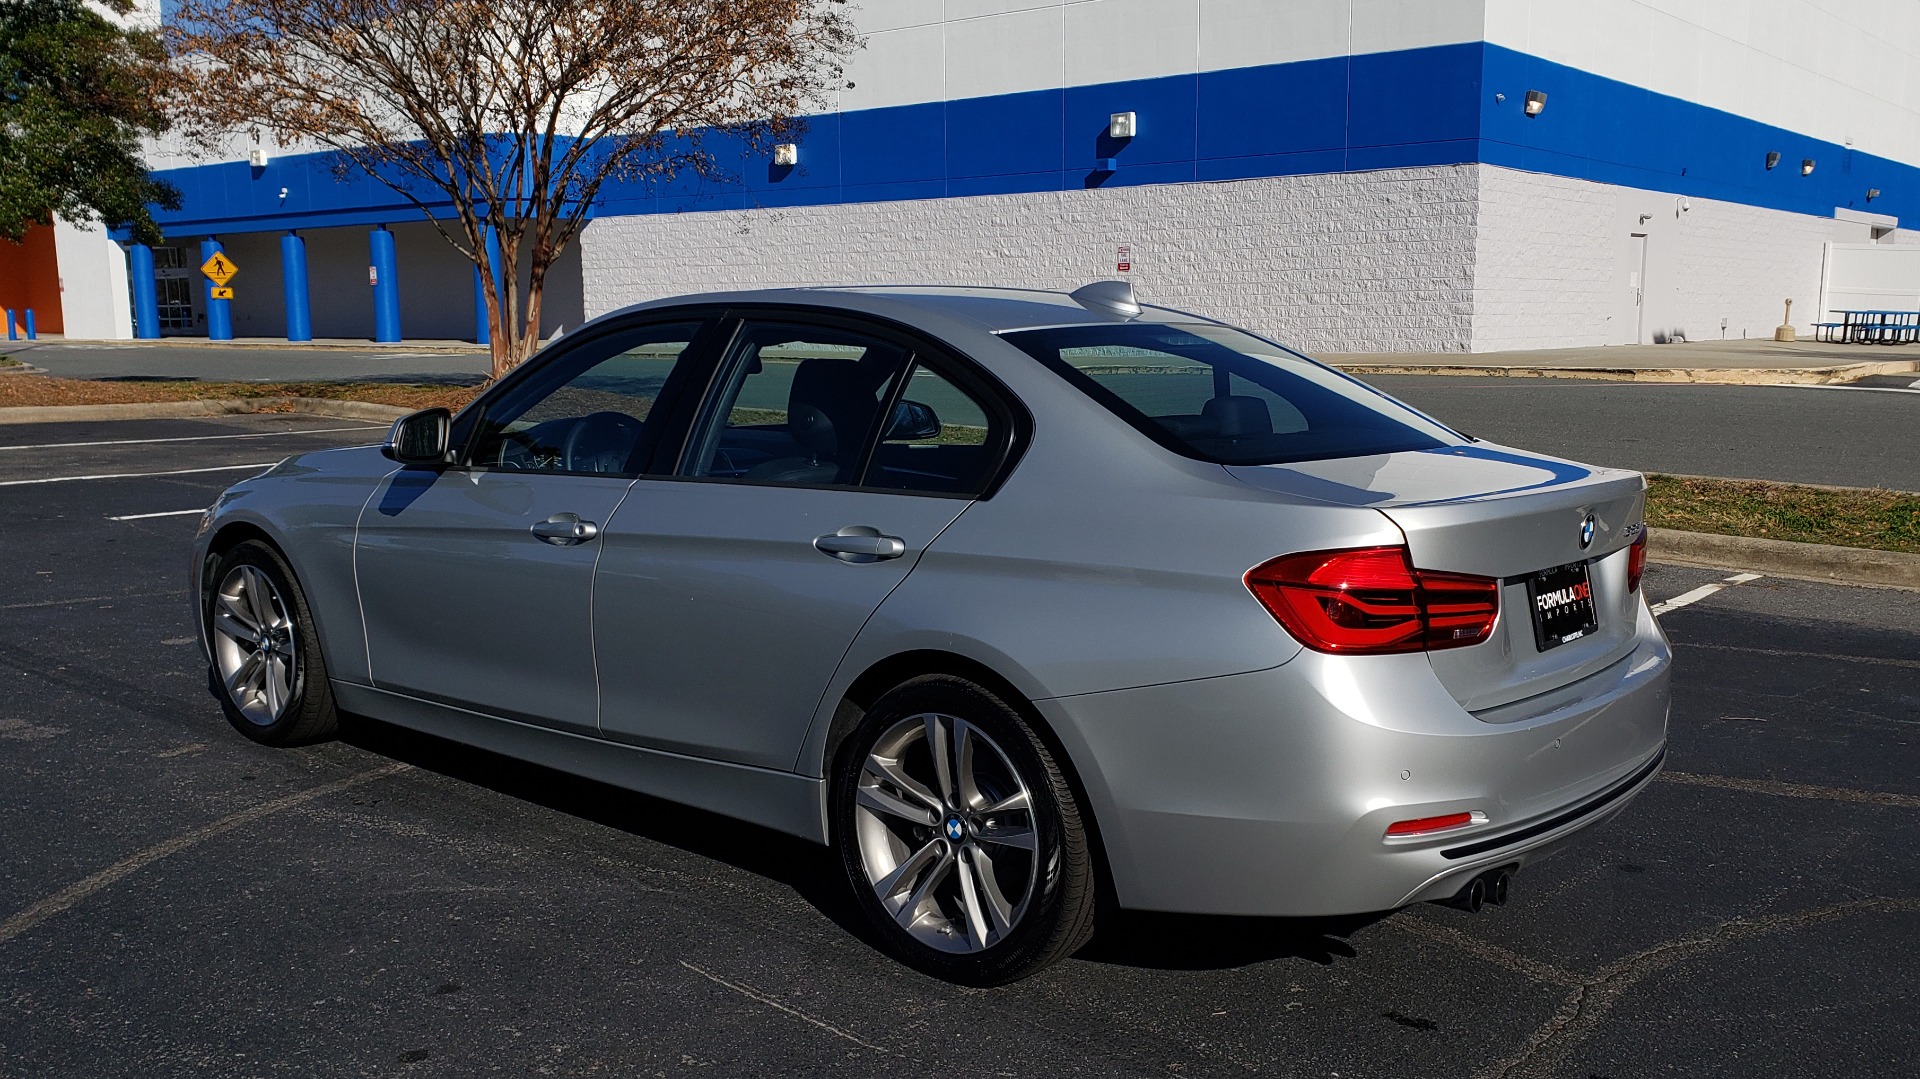 Used 2016 BMW 3 SERIES 328I / DRVR ASST / SUNROOF / REARVIEW / 18IN ALLOY WHLS for sale Sold at Formula Imports in Charlotte NC 28227 3